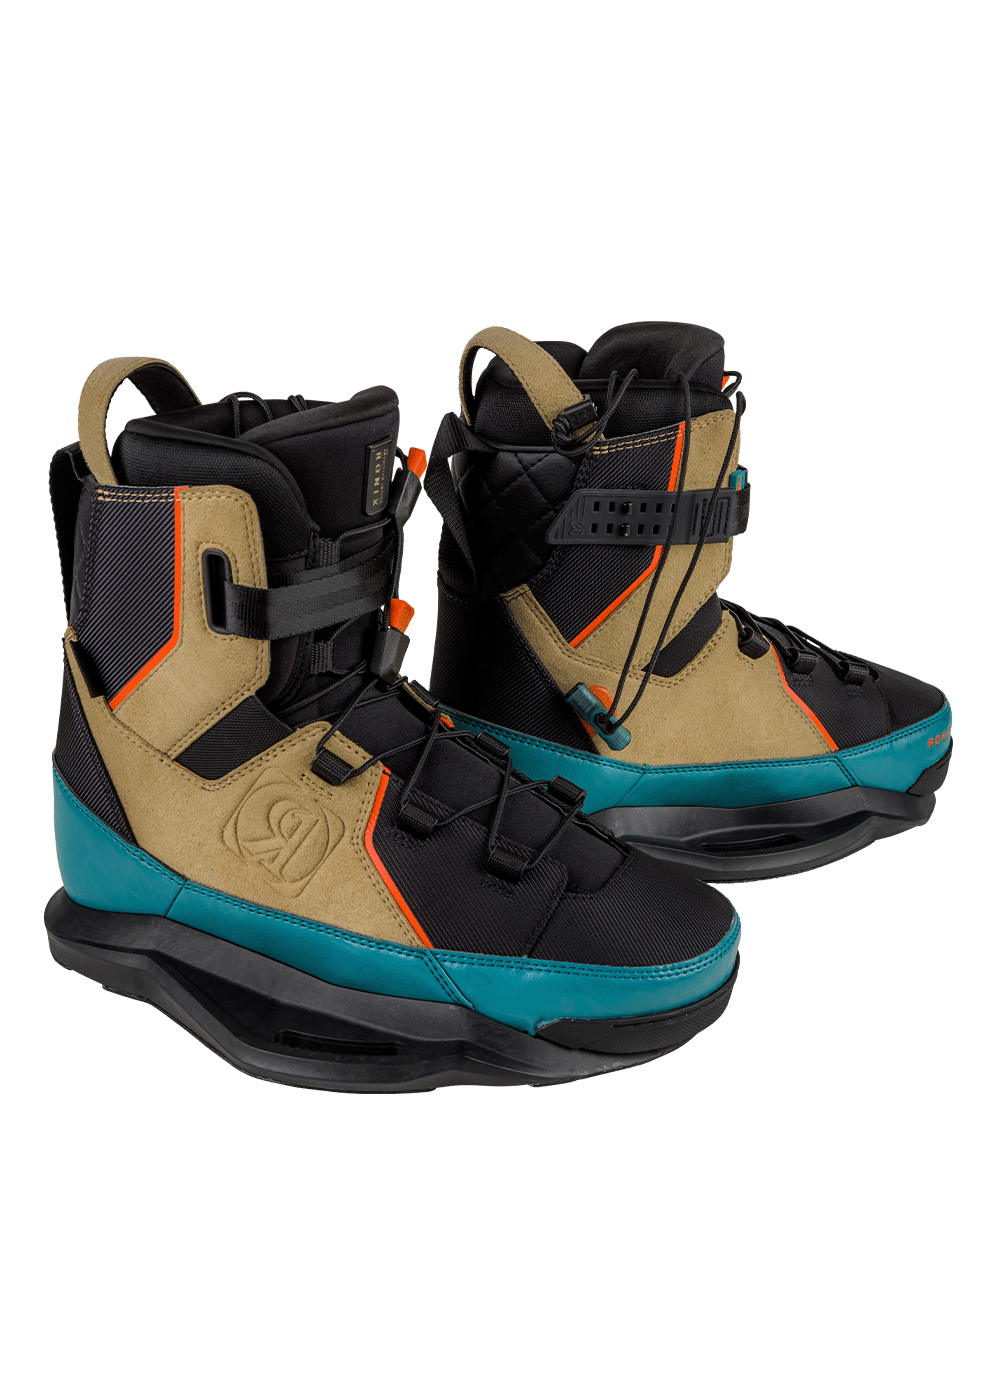 Ronix Atmos EXP Intuition Wakeboard Boots